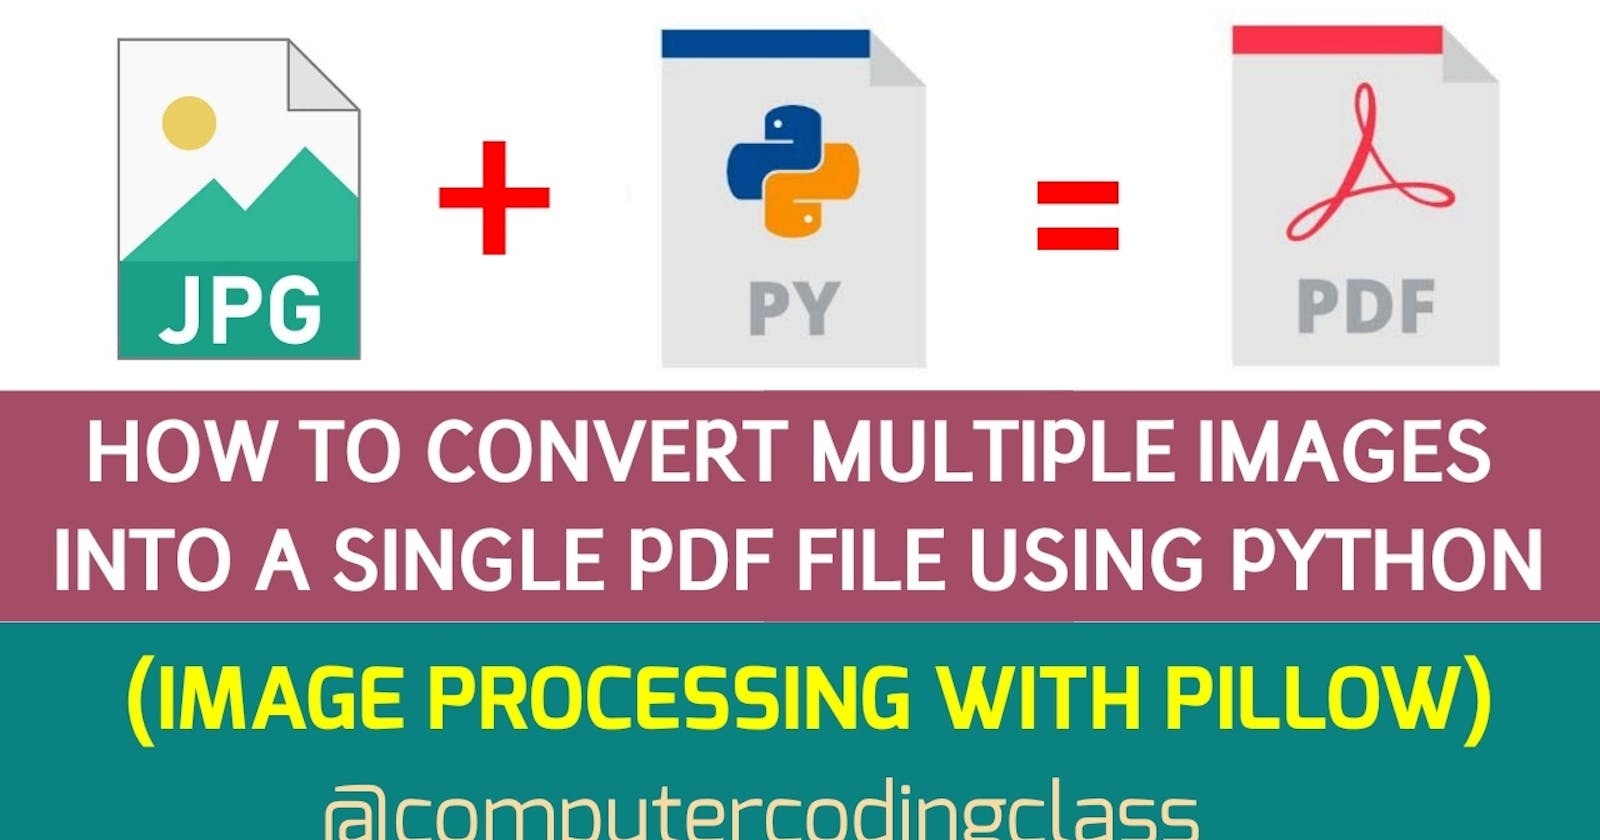 How to Convert Multiple Images into Single PDF File using Python